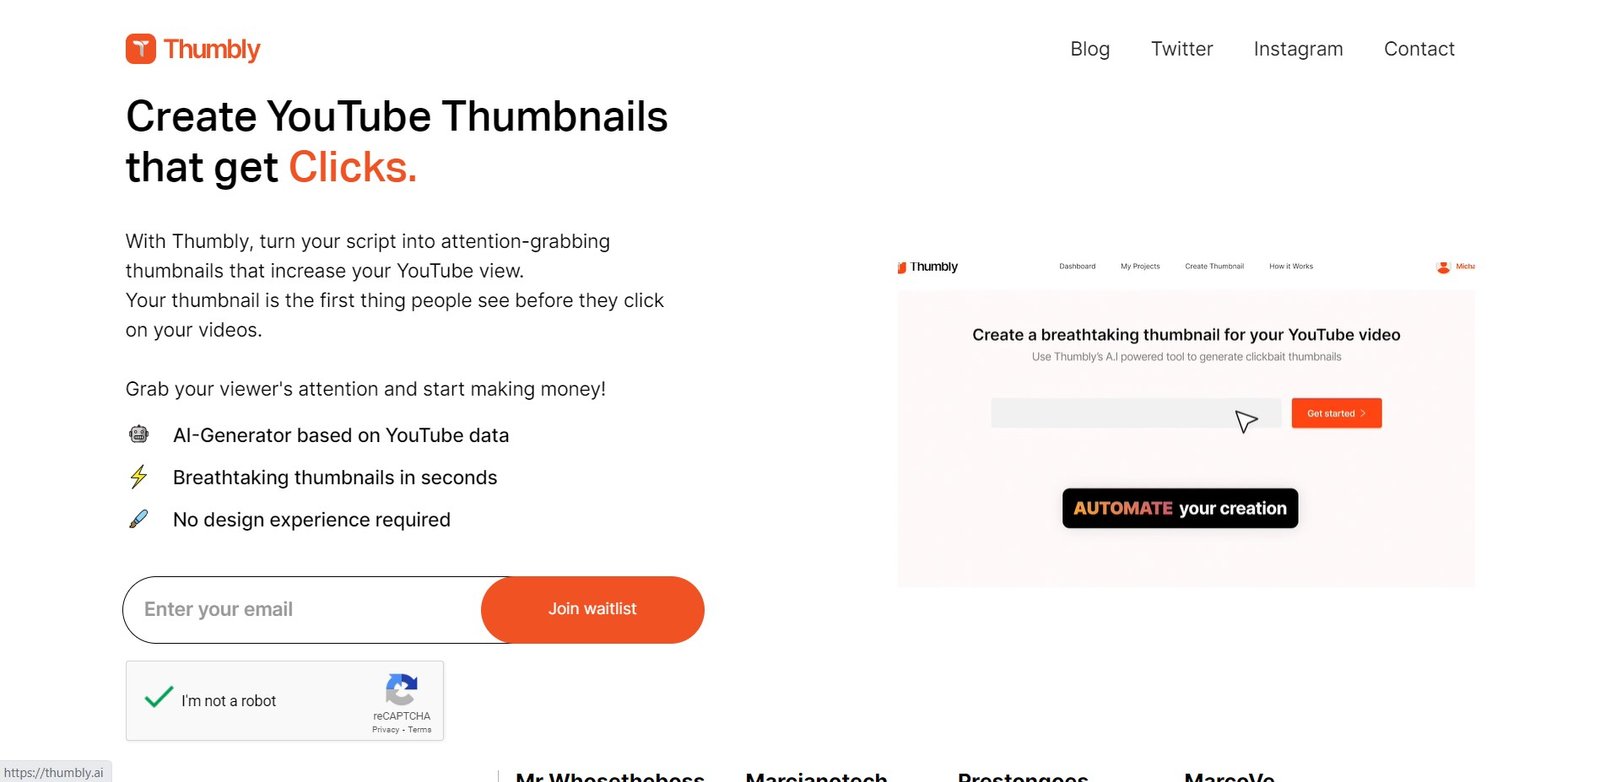 Thumbly AI uses advanced AI technology that analyzes YouTube data to generate clickbait thumbnails